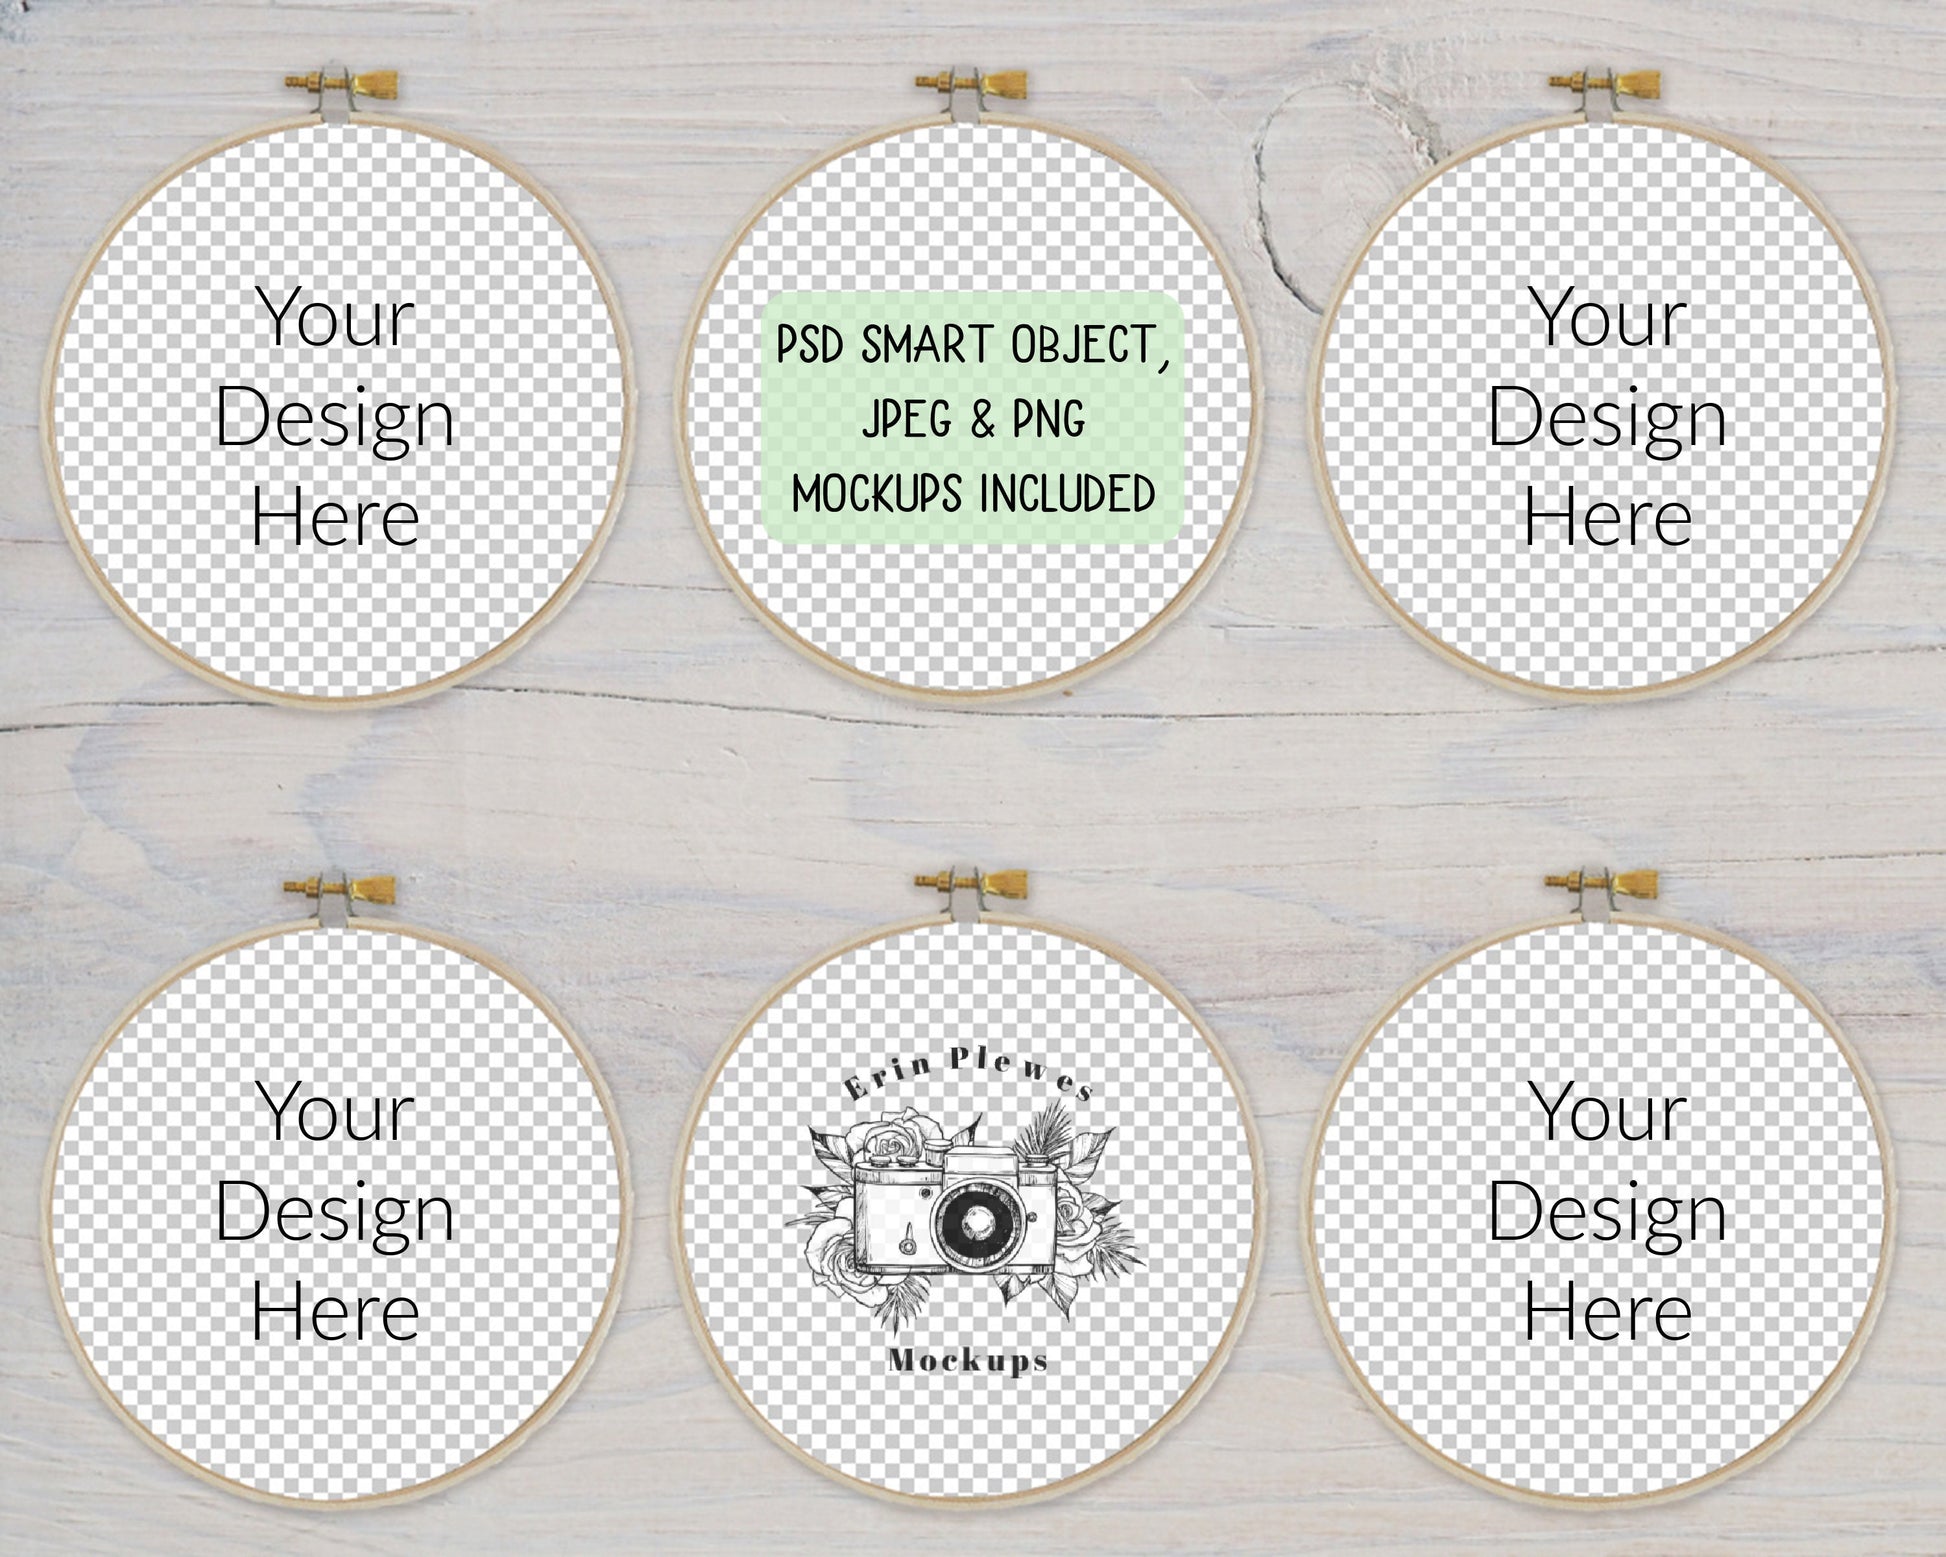 Embroidery Hoop Mockup Set of 6, Cross Stich Mock-Up, Sewing Mock Up on Rustic White Wood, PSD Smart Object Template JPG PNG